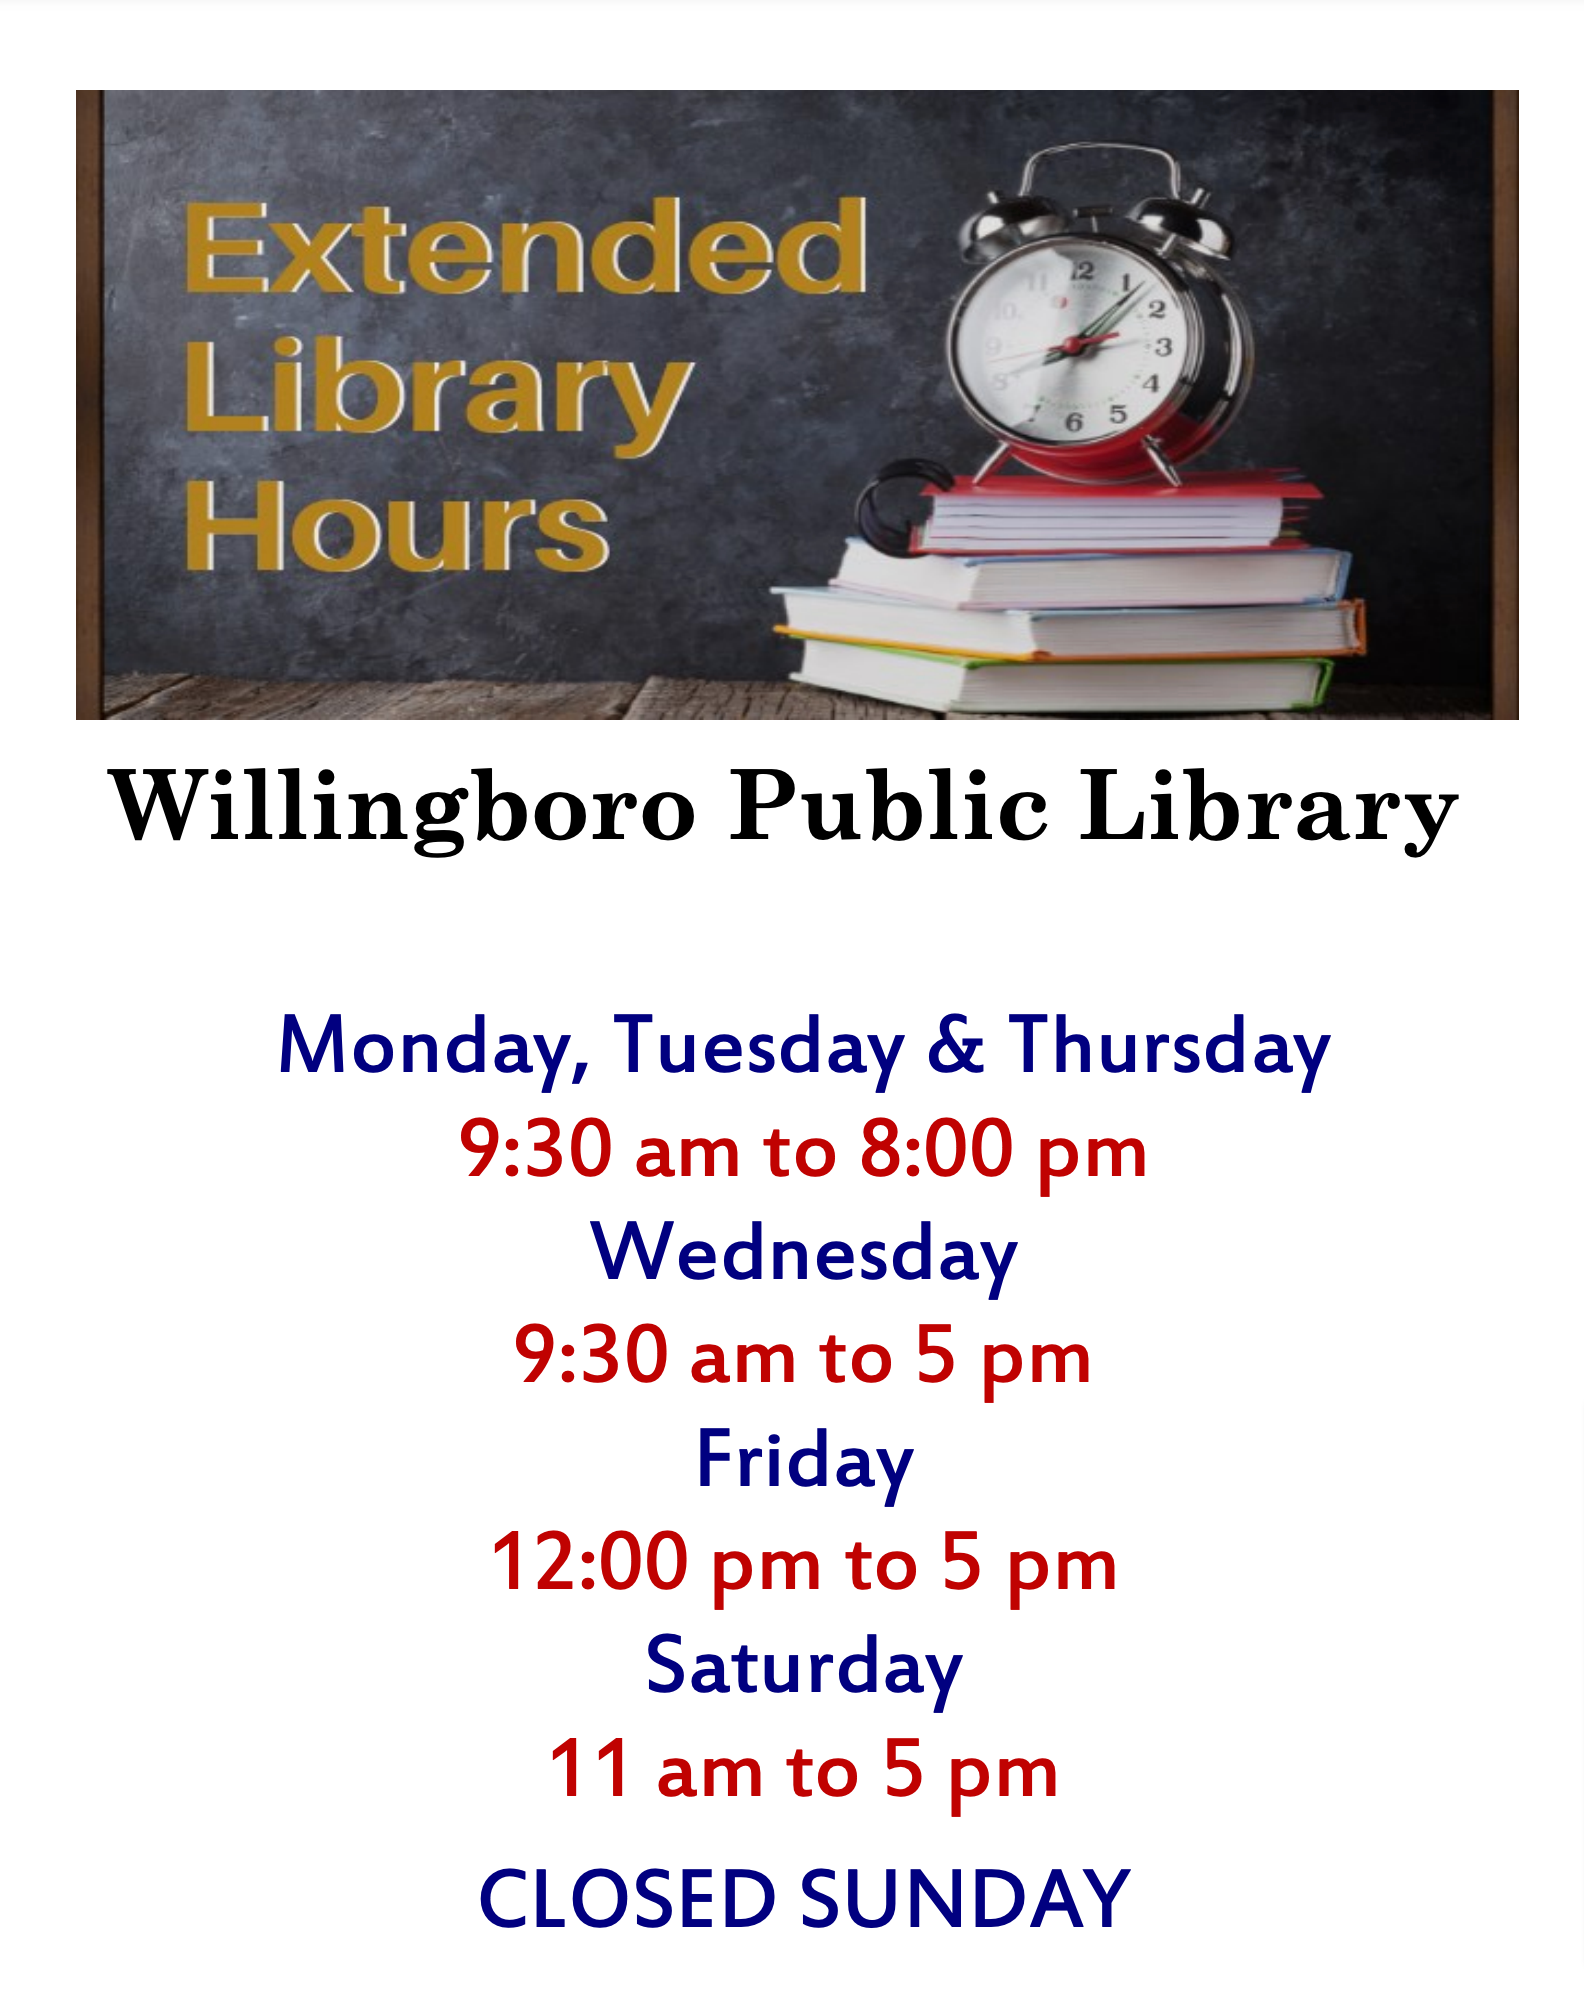 library hours